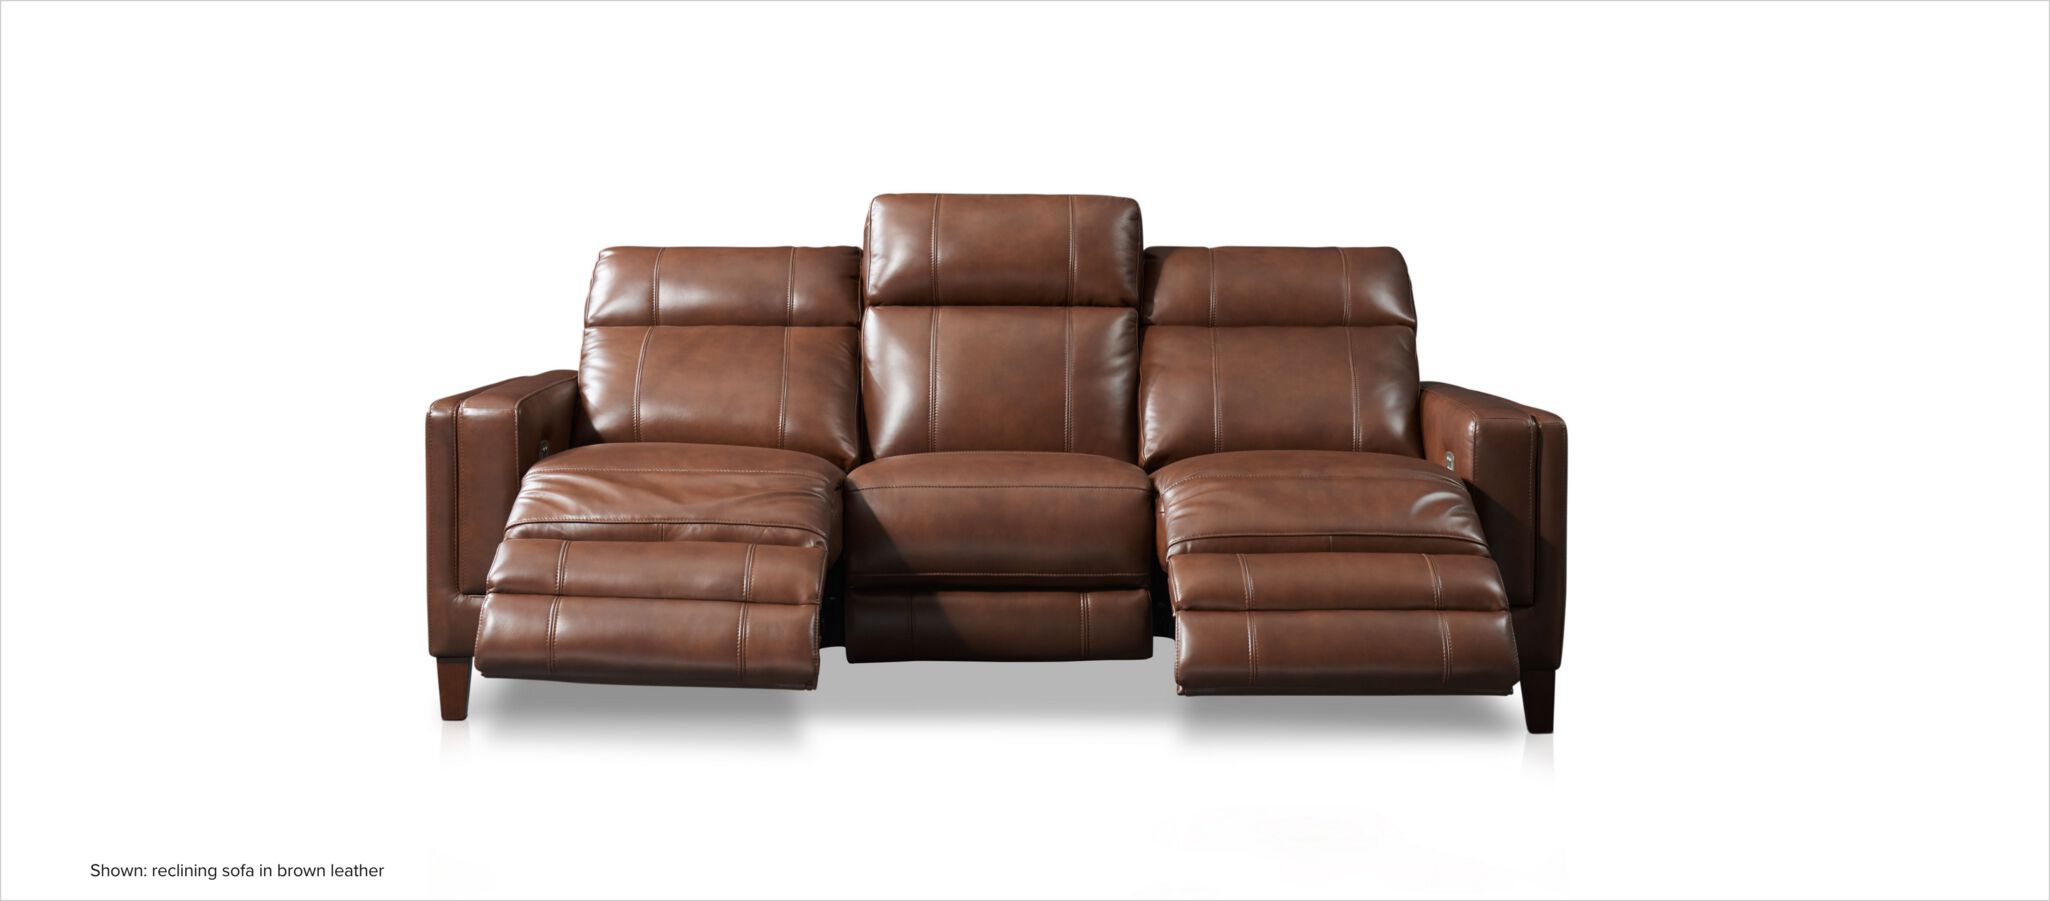 Oliver reclining sofa in brown leather